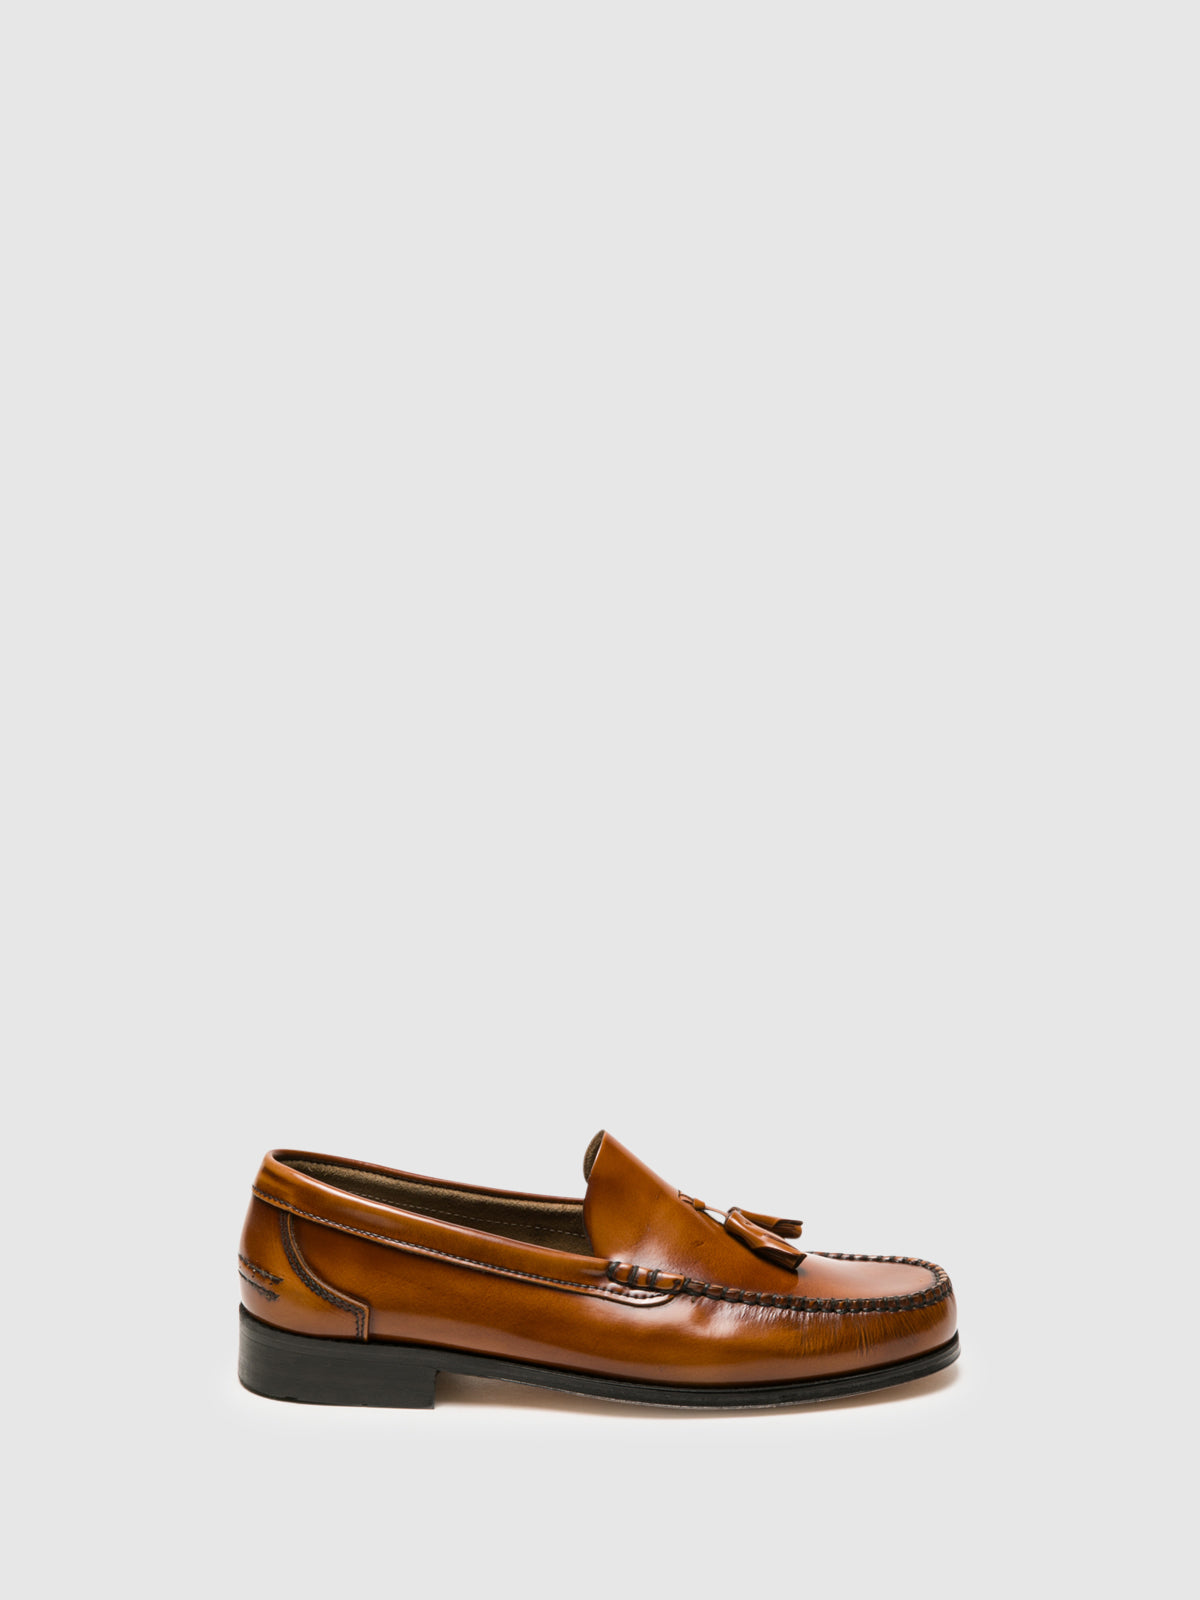 Sotoalto Brown Loafers Shoes